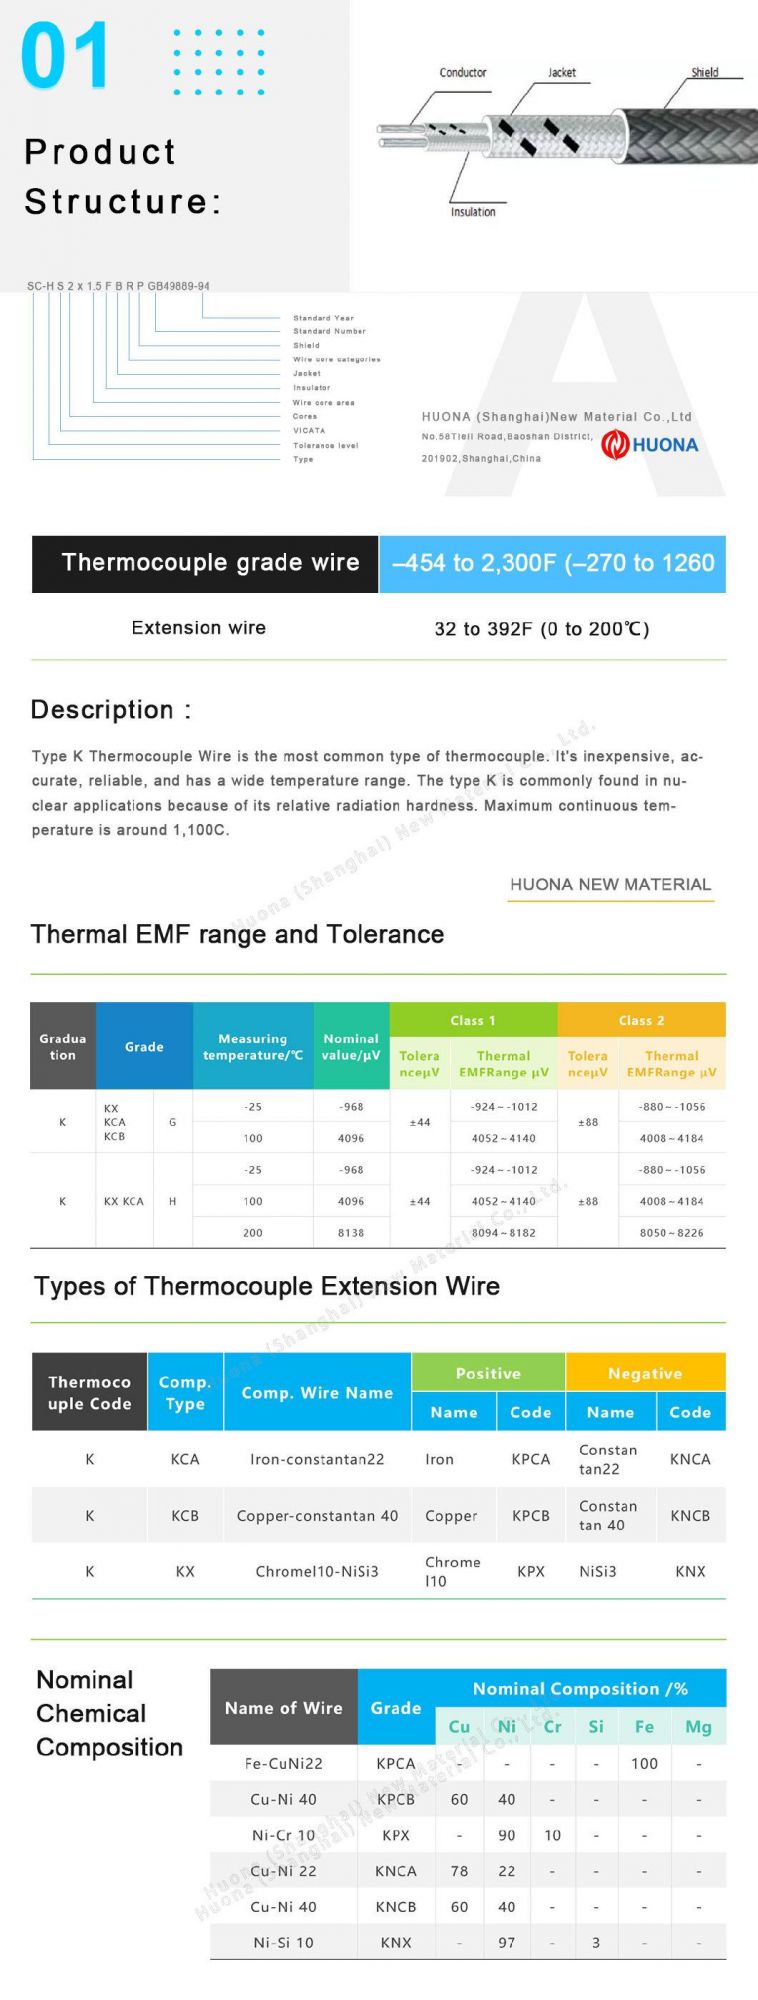 K/J/PT100 Type Flexible Thermocouple Probe with Insulated High-Temperature Lead Wire